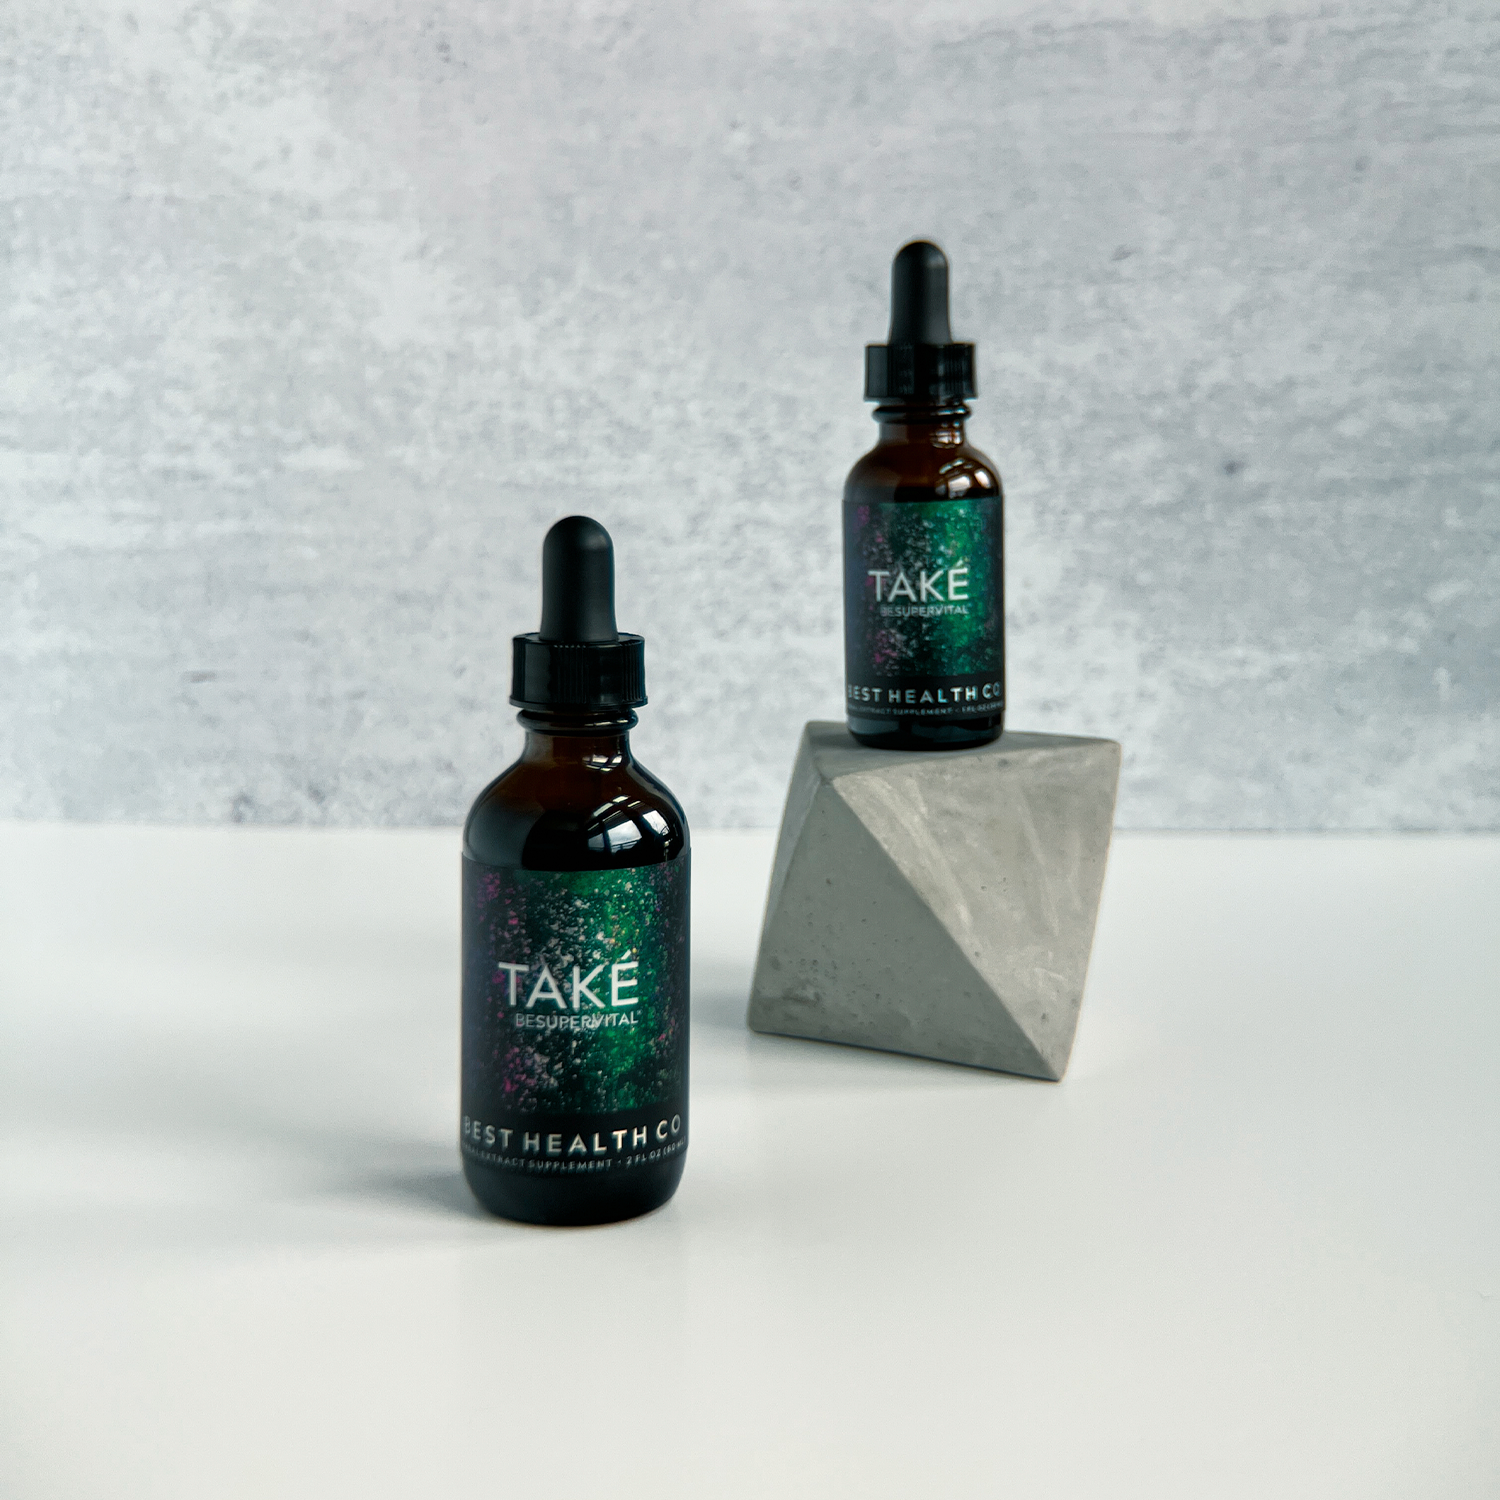 TAKÉ both 2 oz (60mL) and 1 oz (30mL) sizes from Best Health Co.